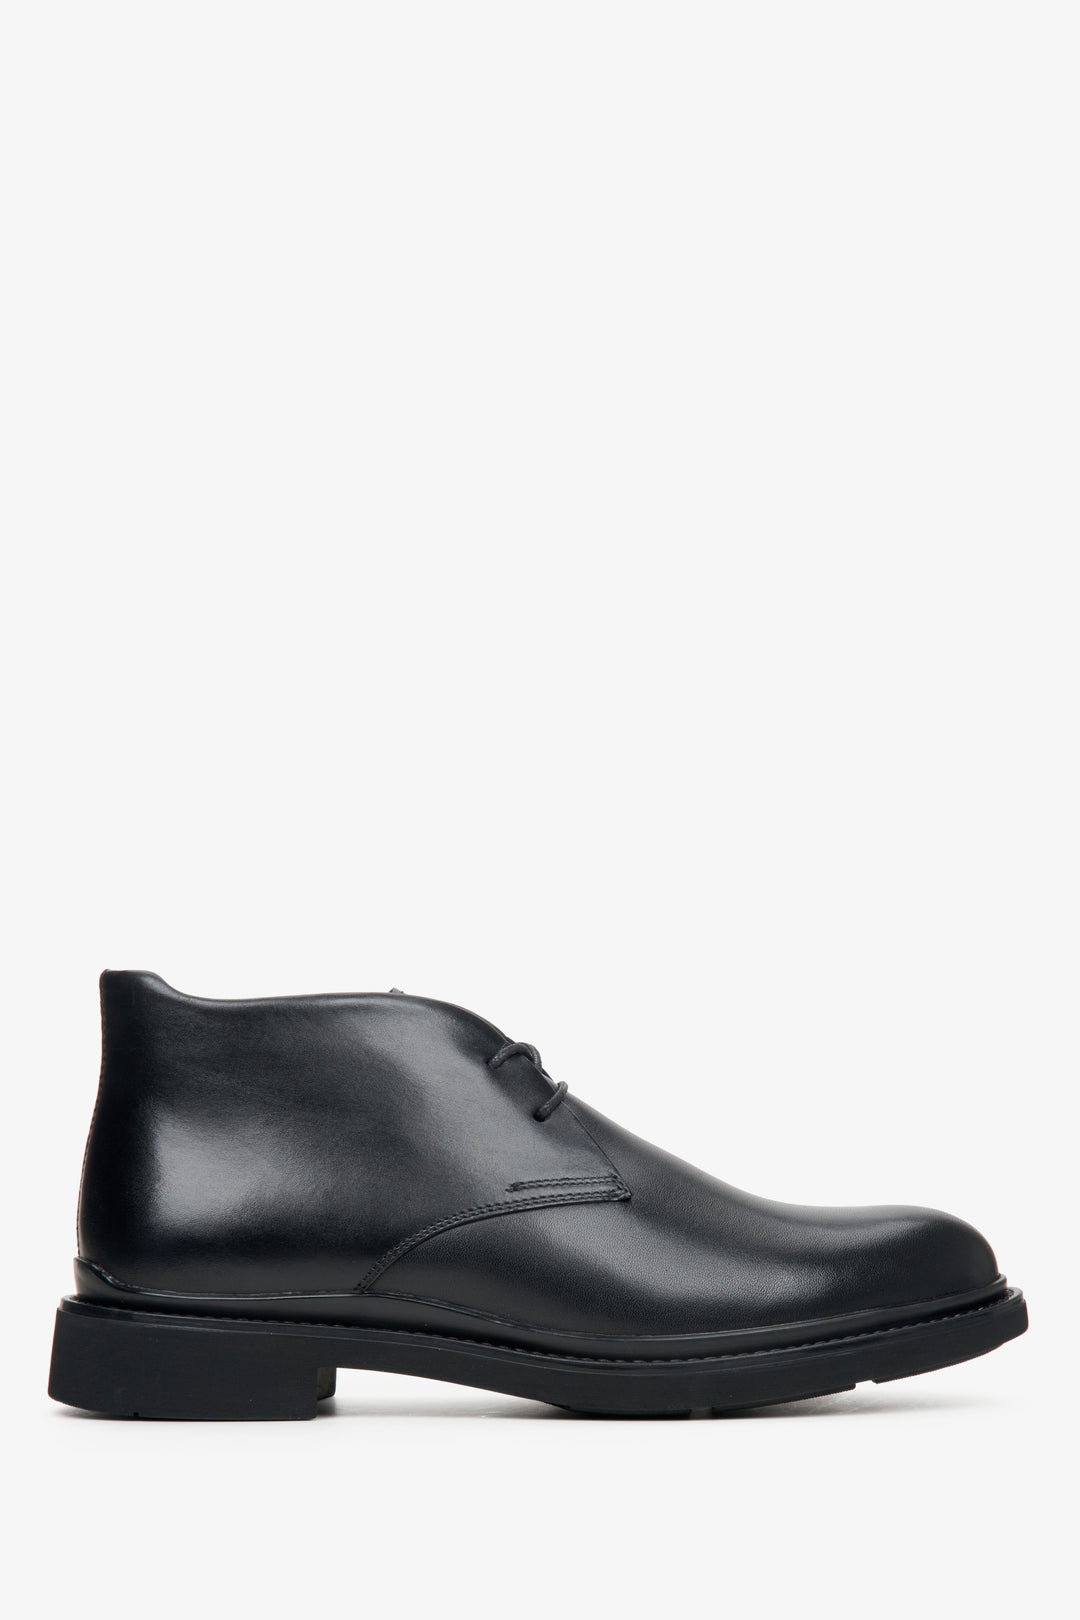 Men's Black Boots made of Genuine Leather with Short Lacing Estro ER00114064.